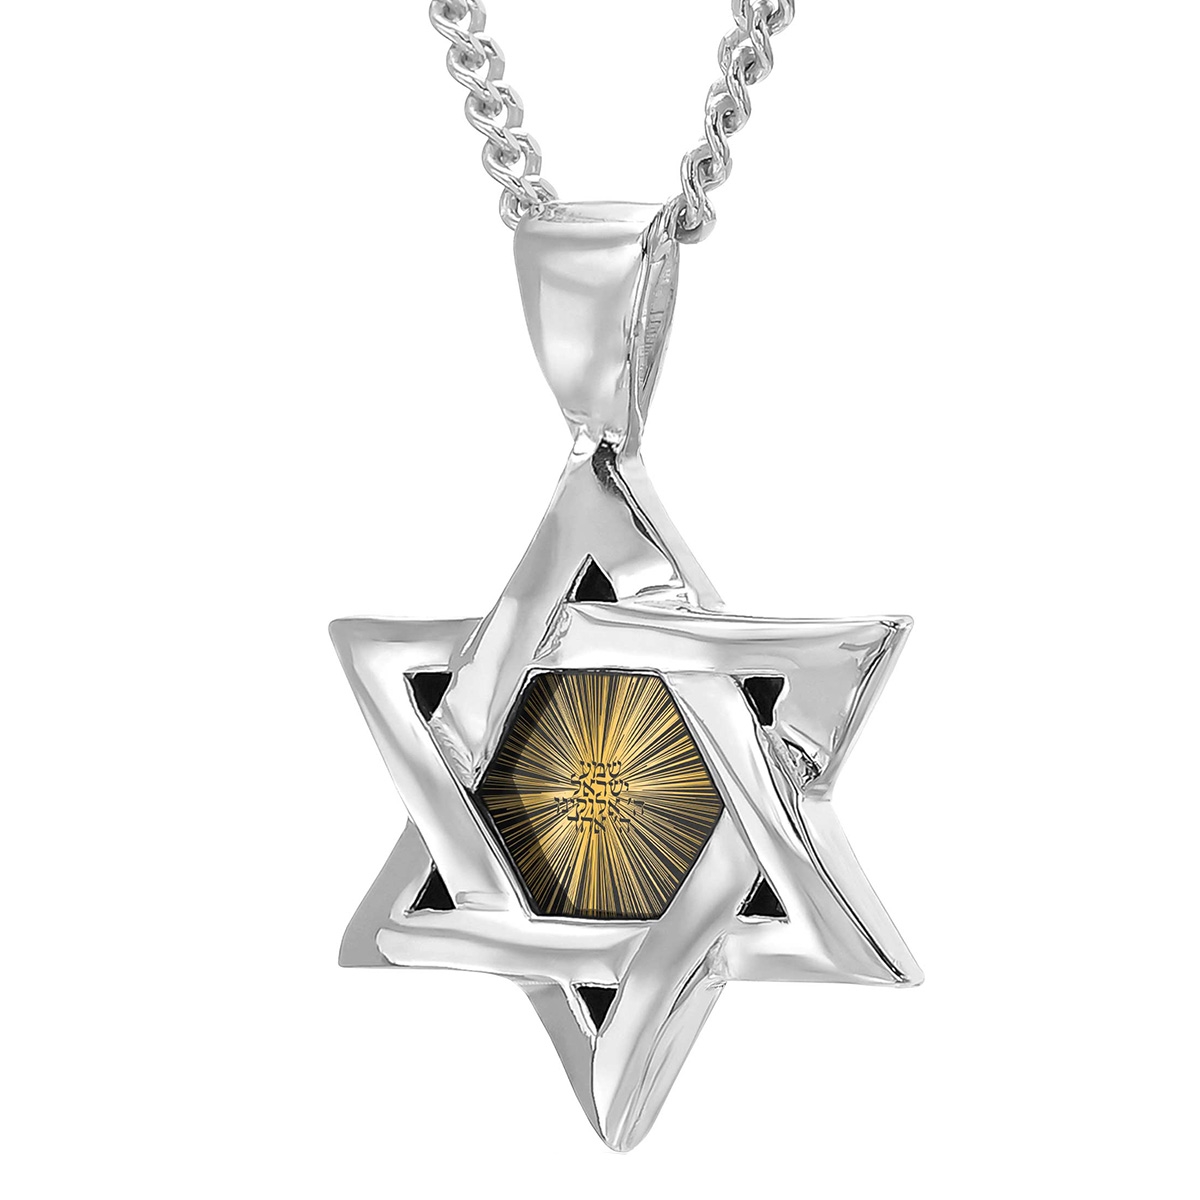 Star of David Necklace with 24K Gold Micro-Inscription of Shema Yisrael  - 1